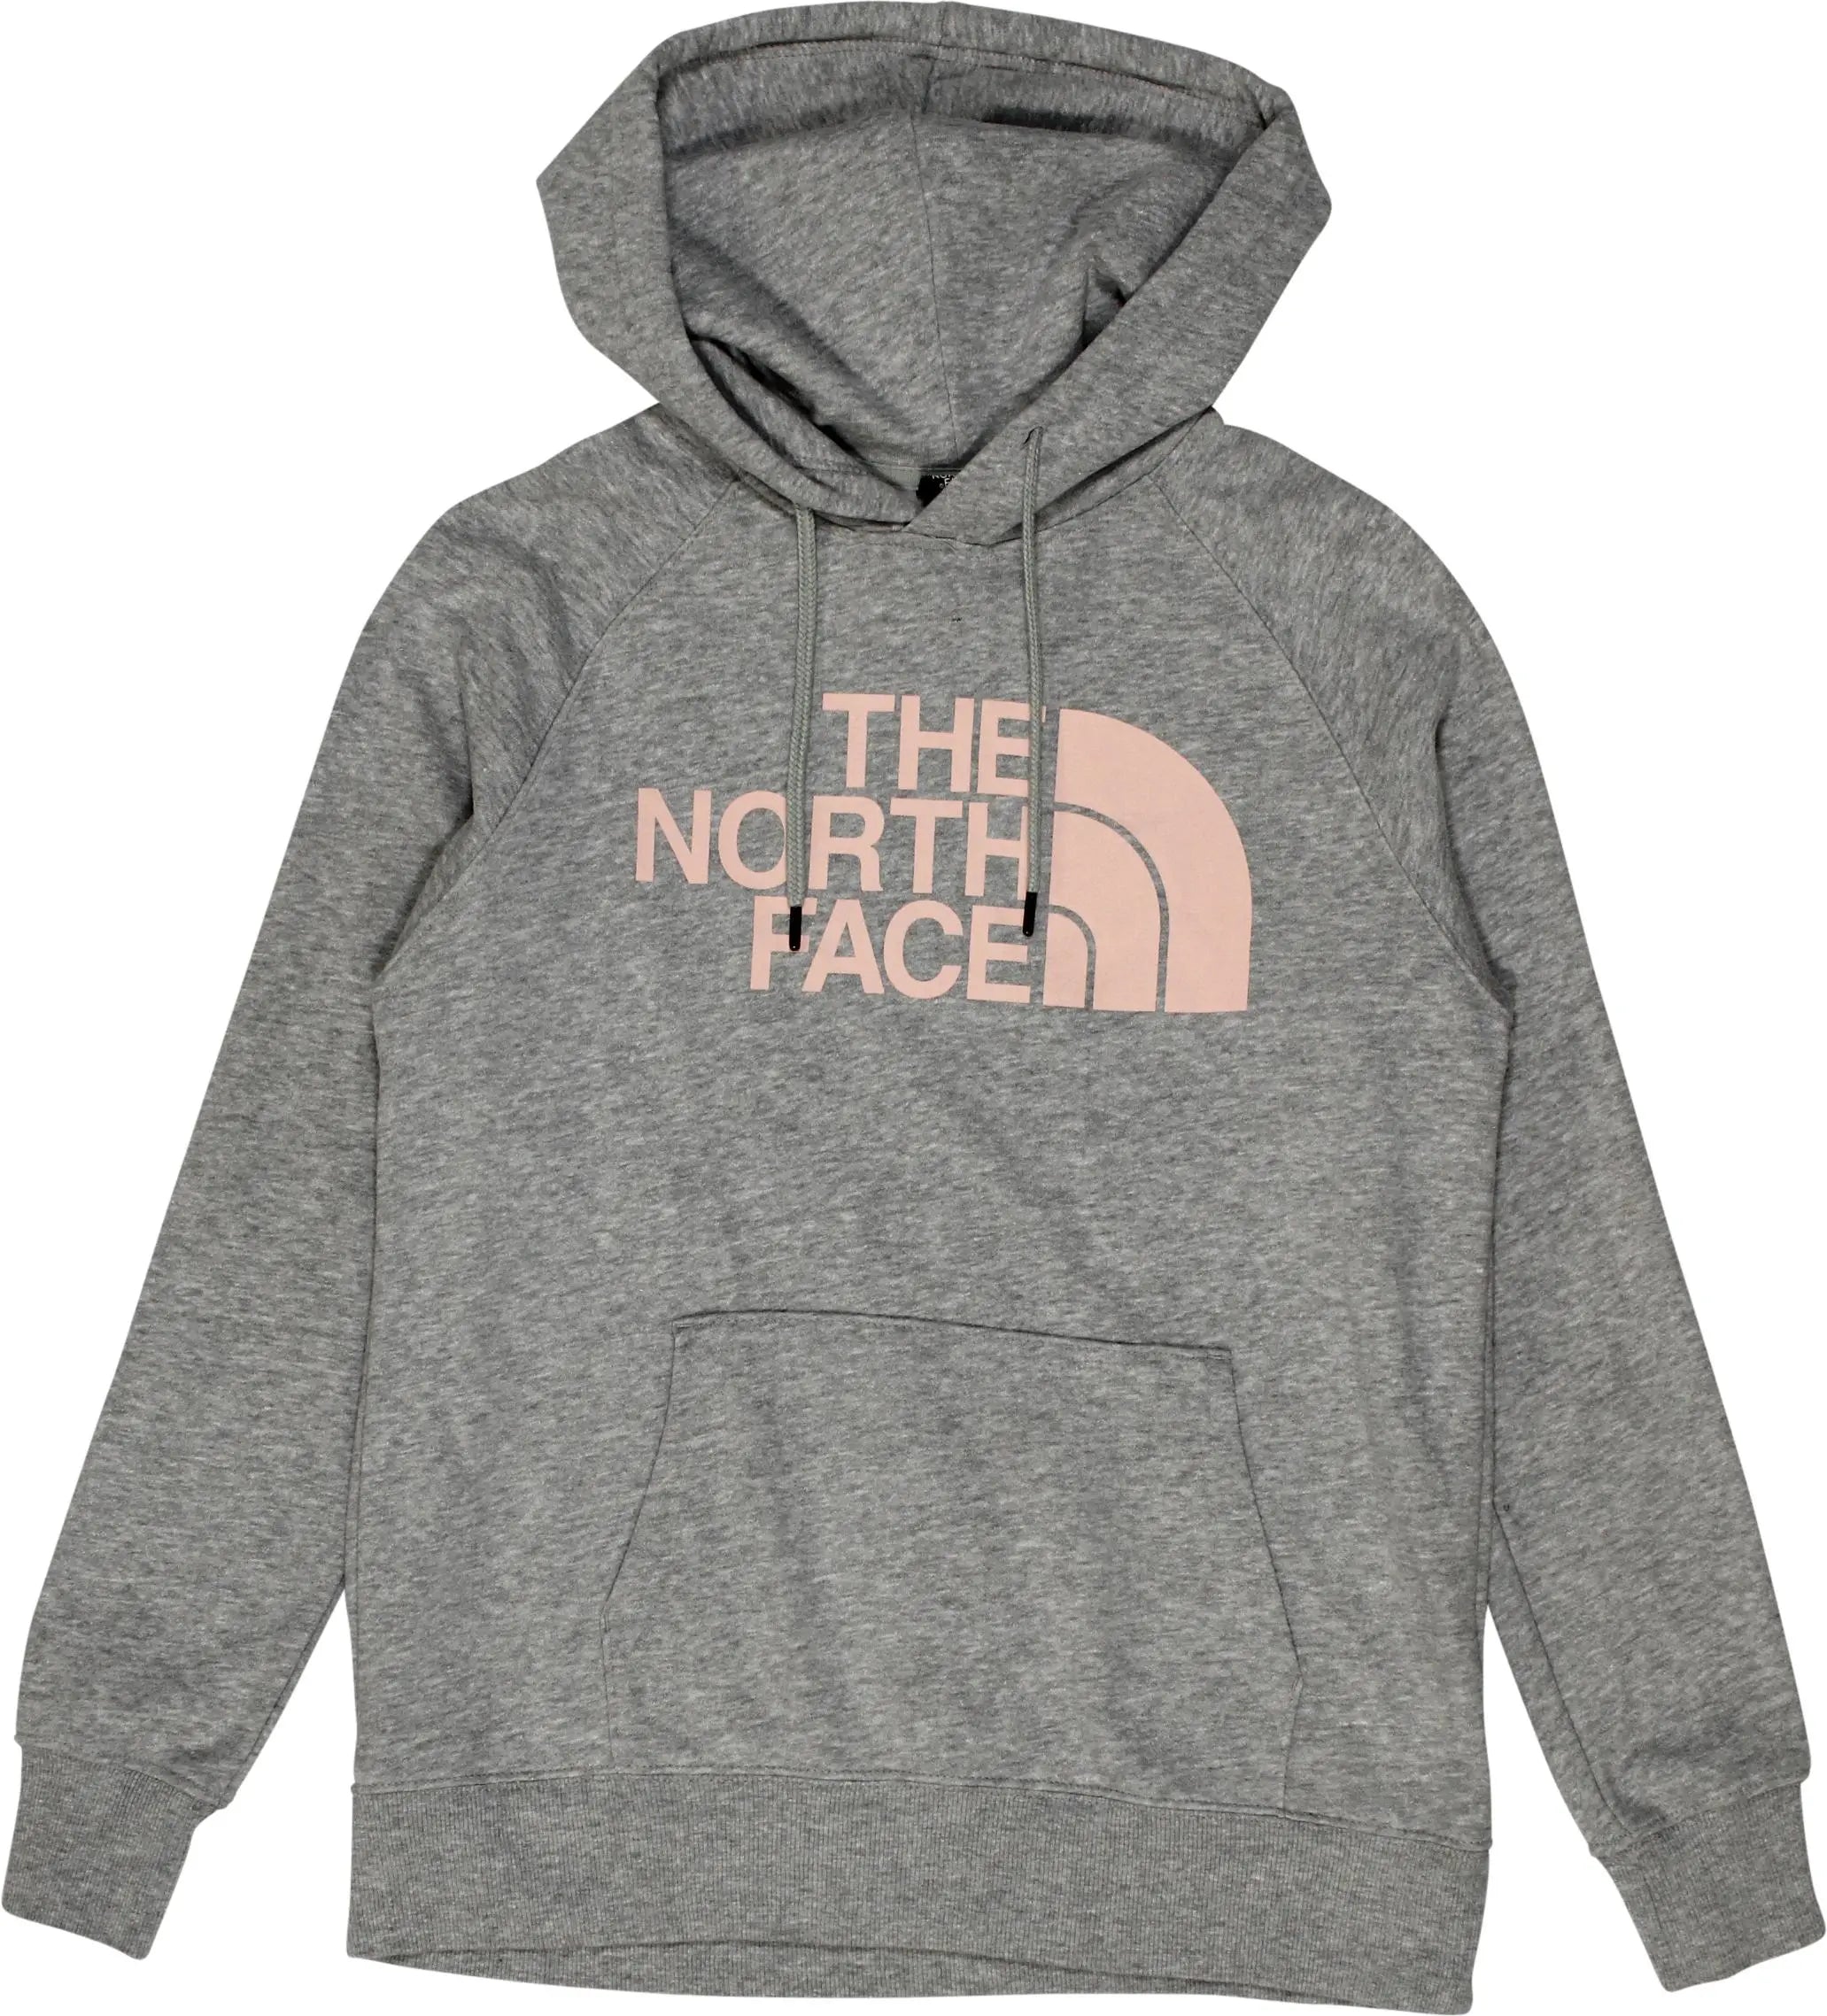 The North Face - The North Face Hoodie- ThriftTale.com - Vintage and second handclothing